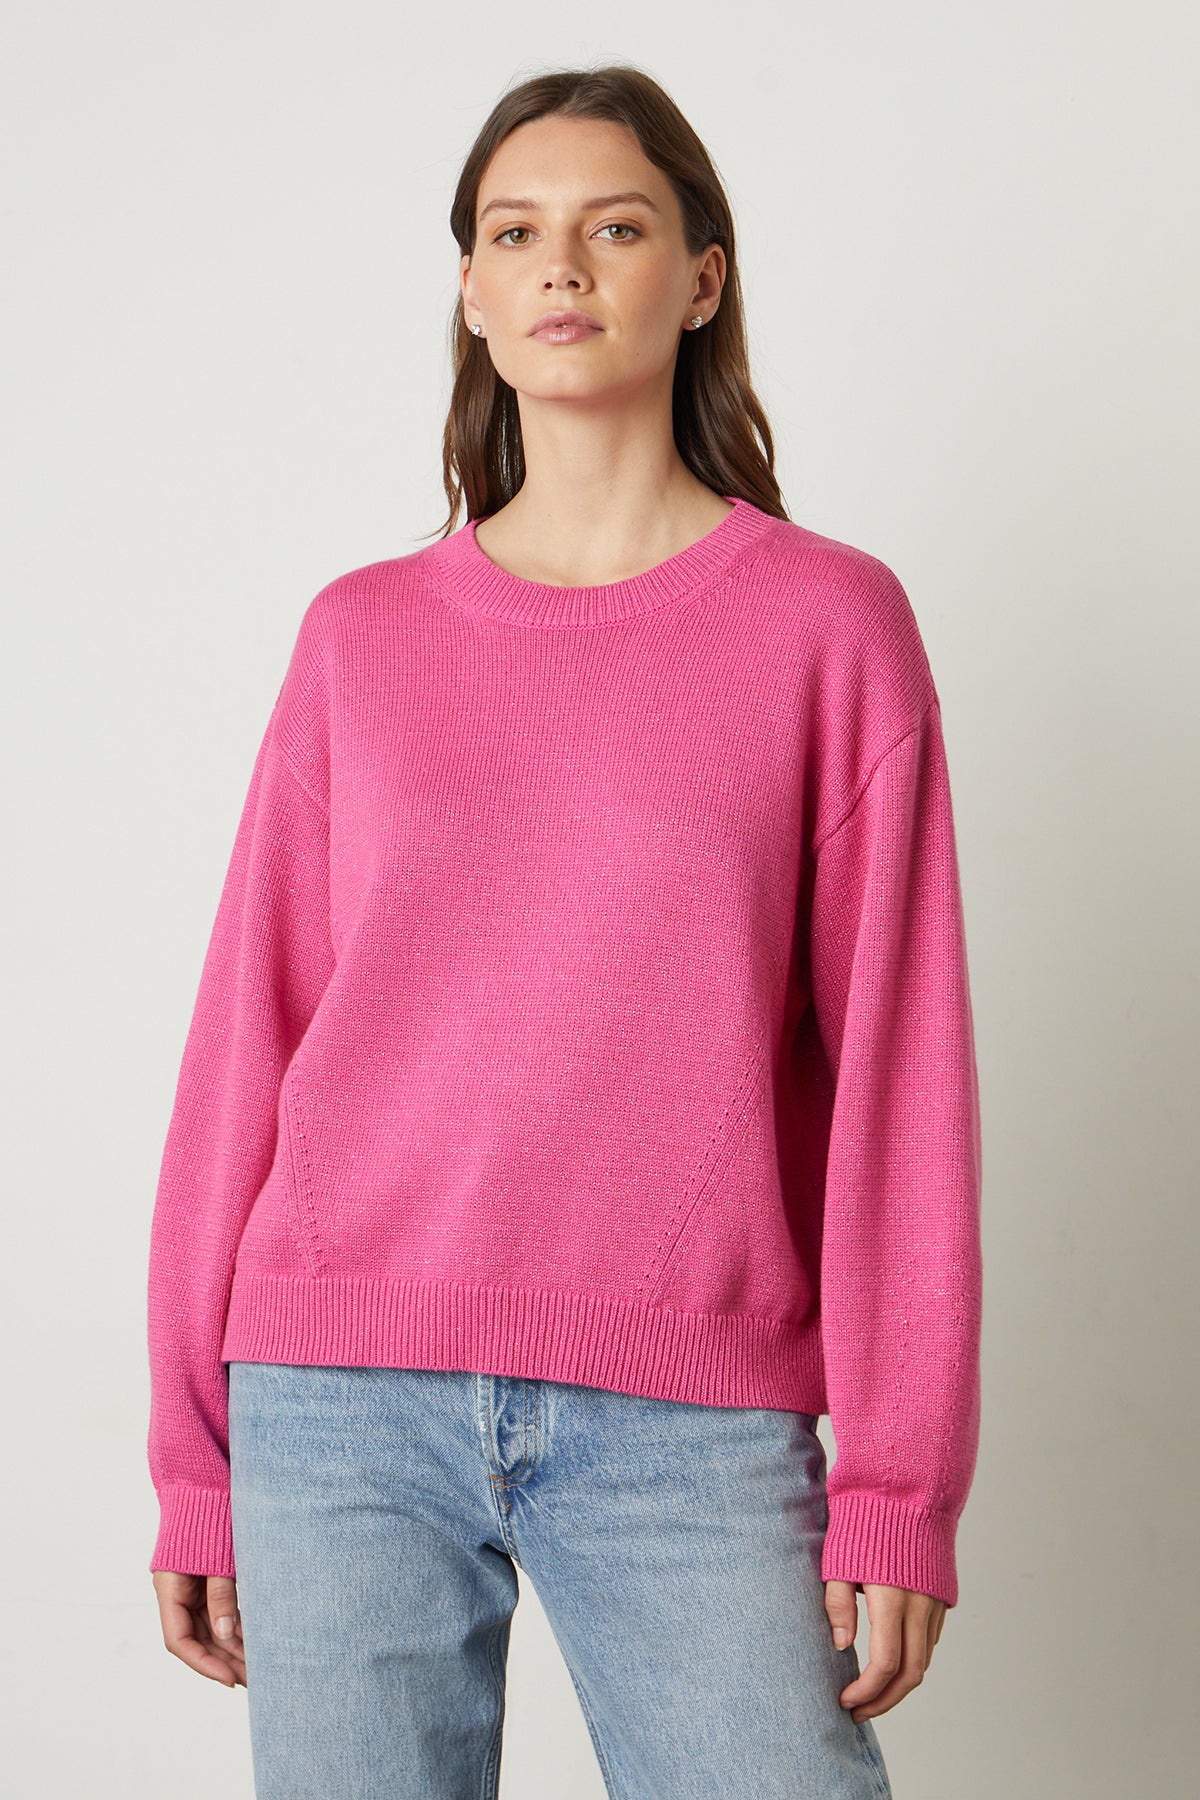   Hallie Crew Neck Sweater in bright candy pink with blue denim front 